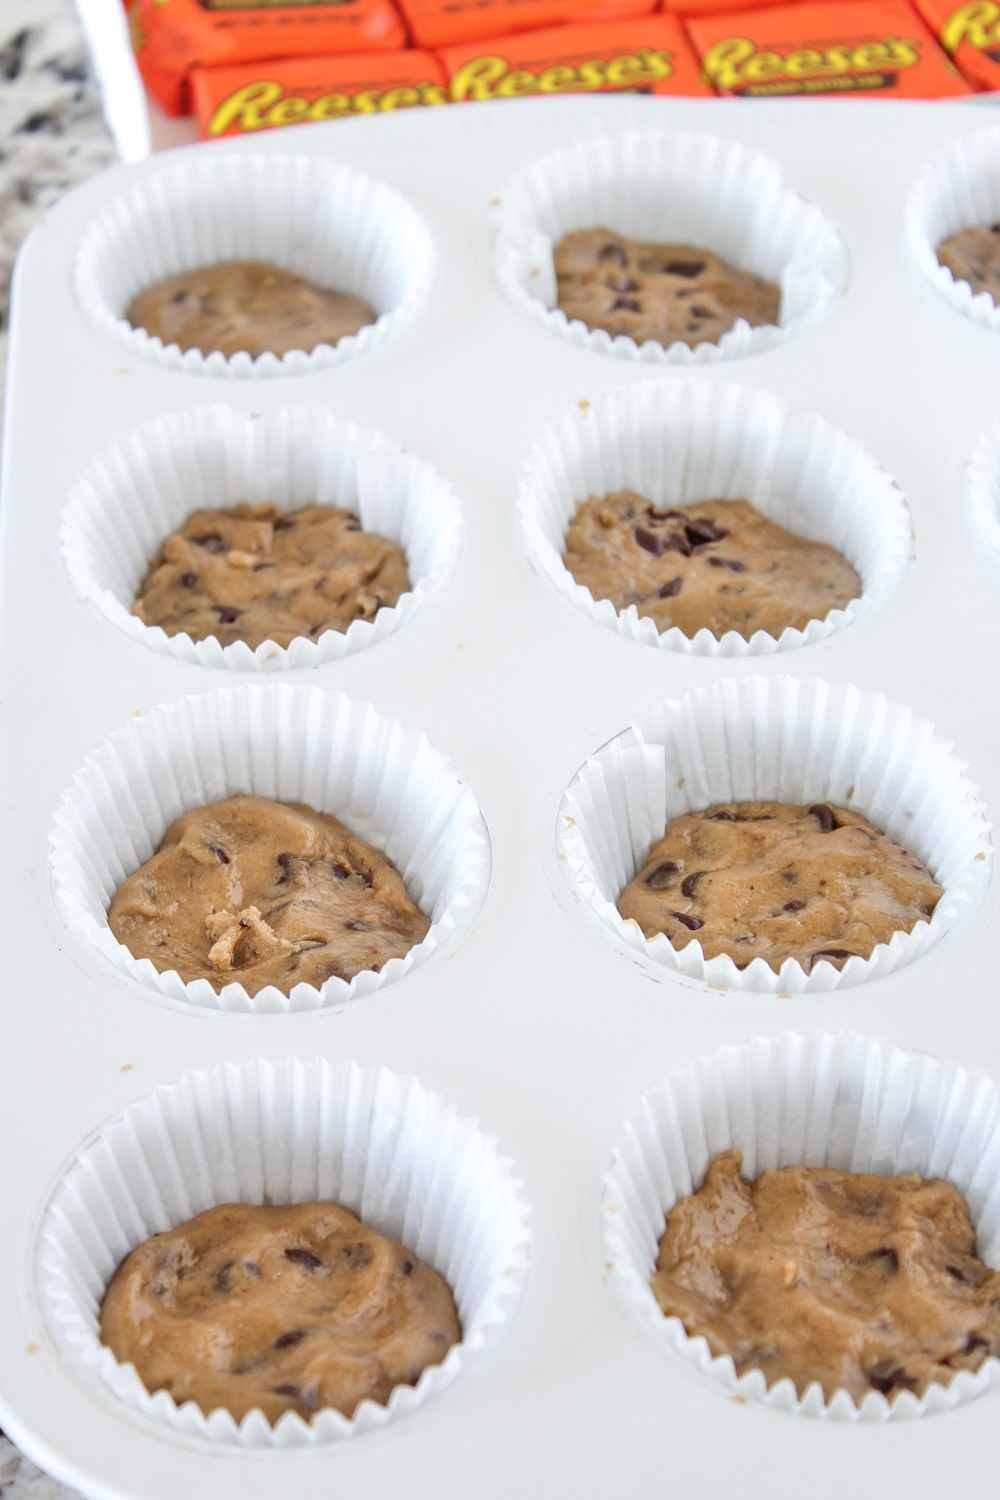 How to Make Cupcakes with Brownies, Cookies, and Peanut Butter Cups